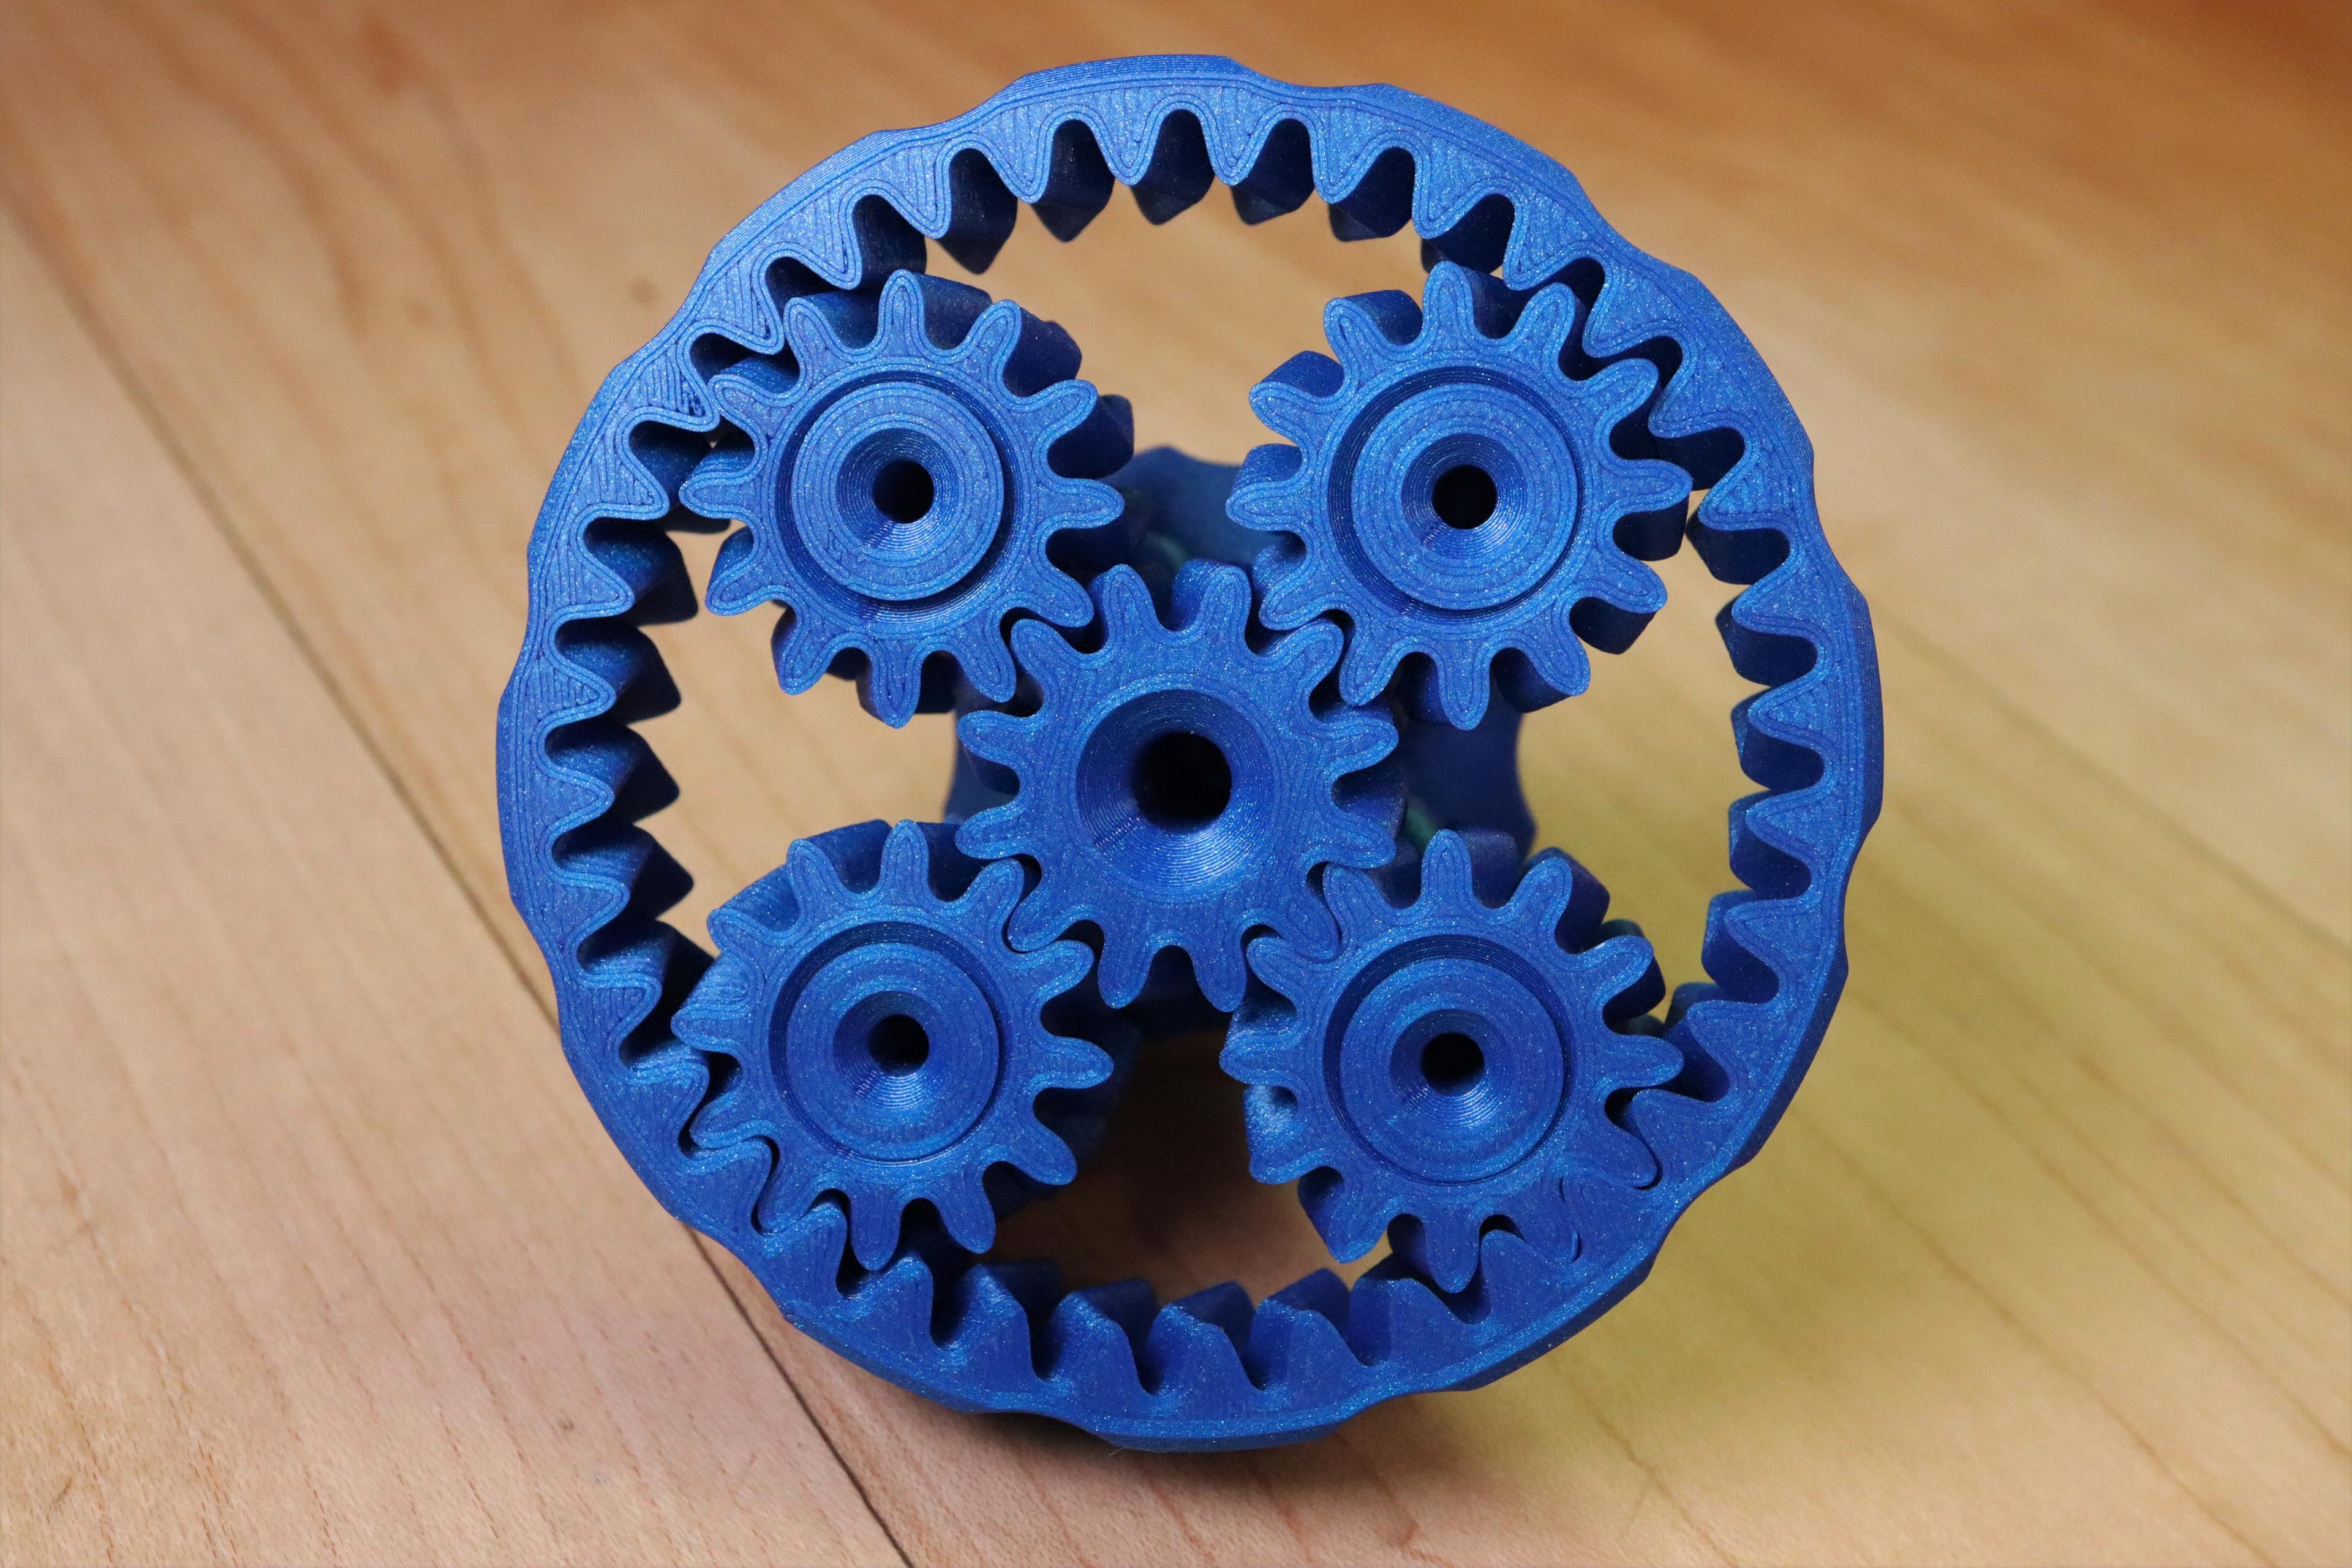 Planetary Gear Print-in-Place Demo  3d model